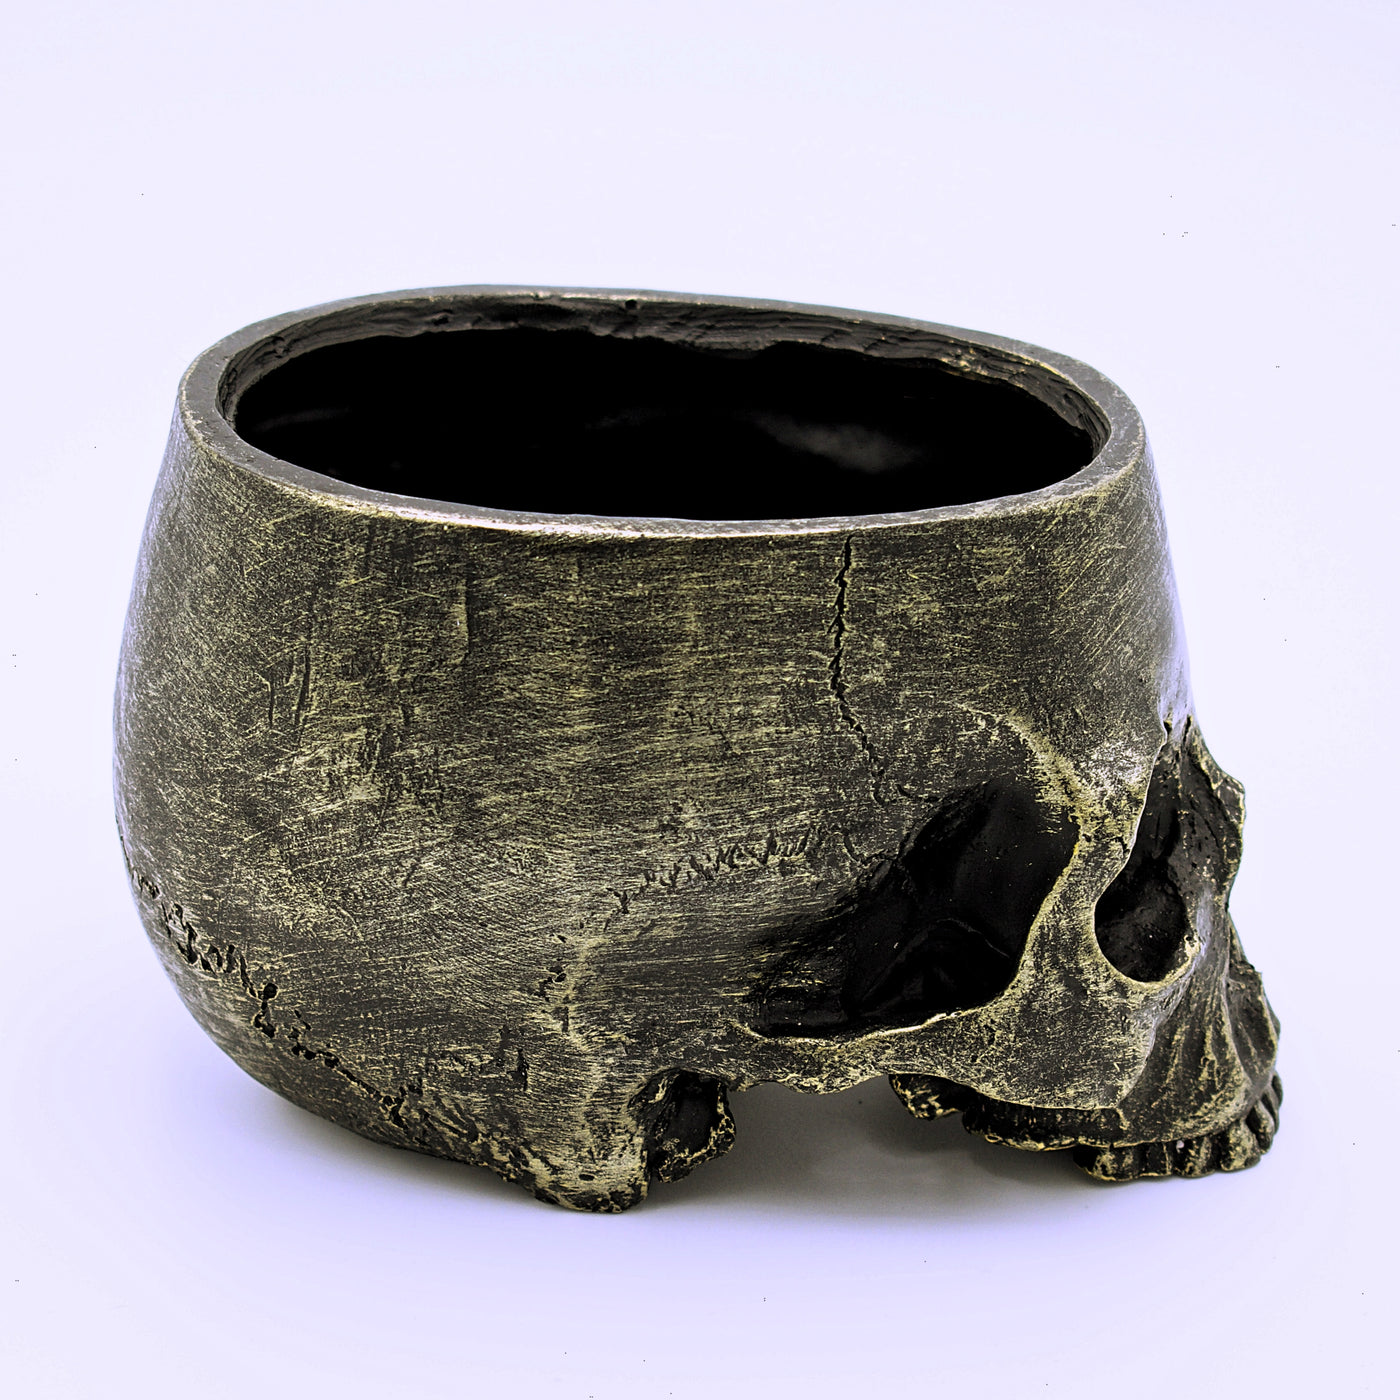 Skull Plant Pot with Drainage Hole - The Cranio Collections